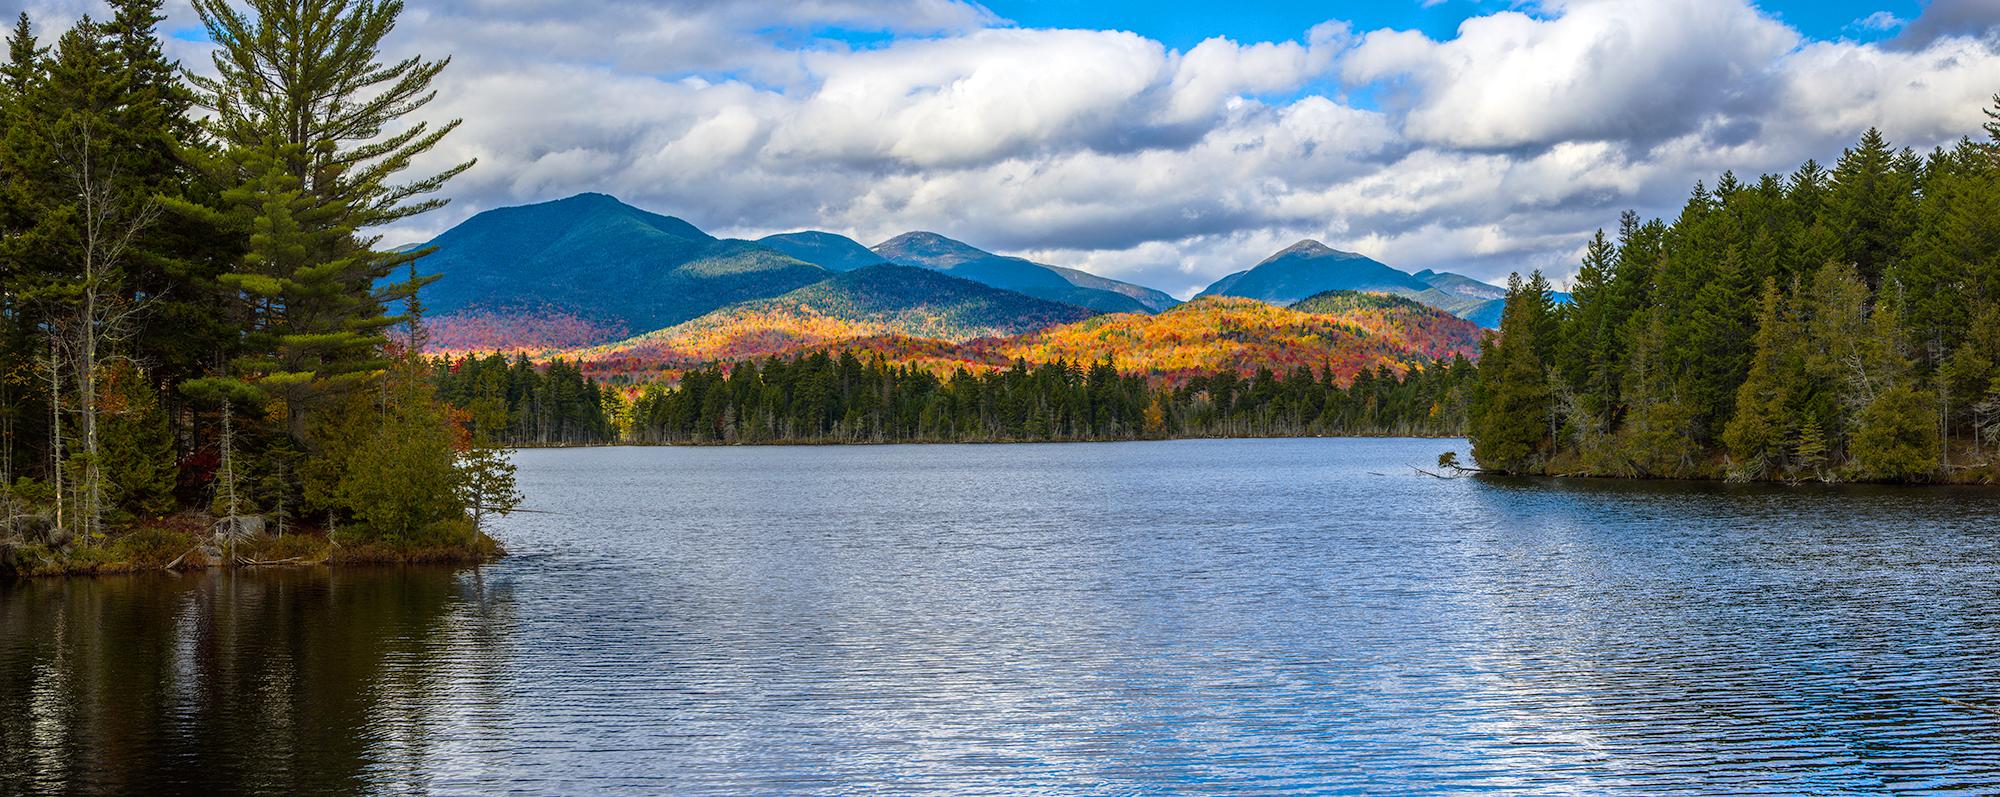 The Adirondack High Peaks seen from Boreas Pond in North Hudson during fall foliage season